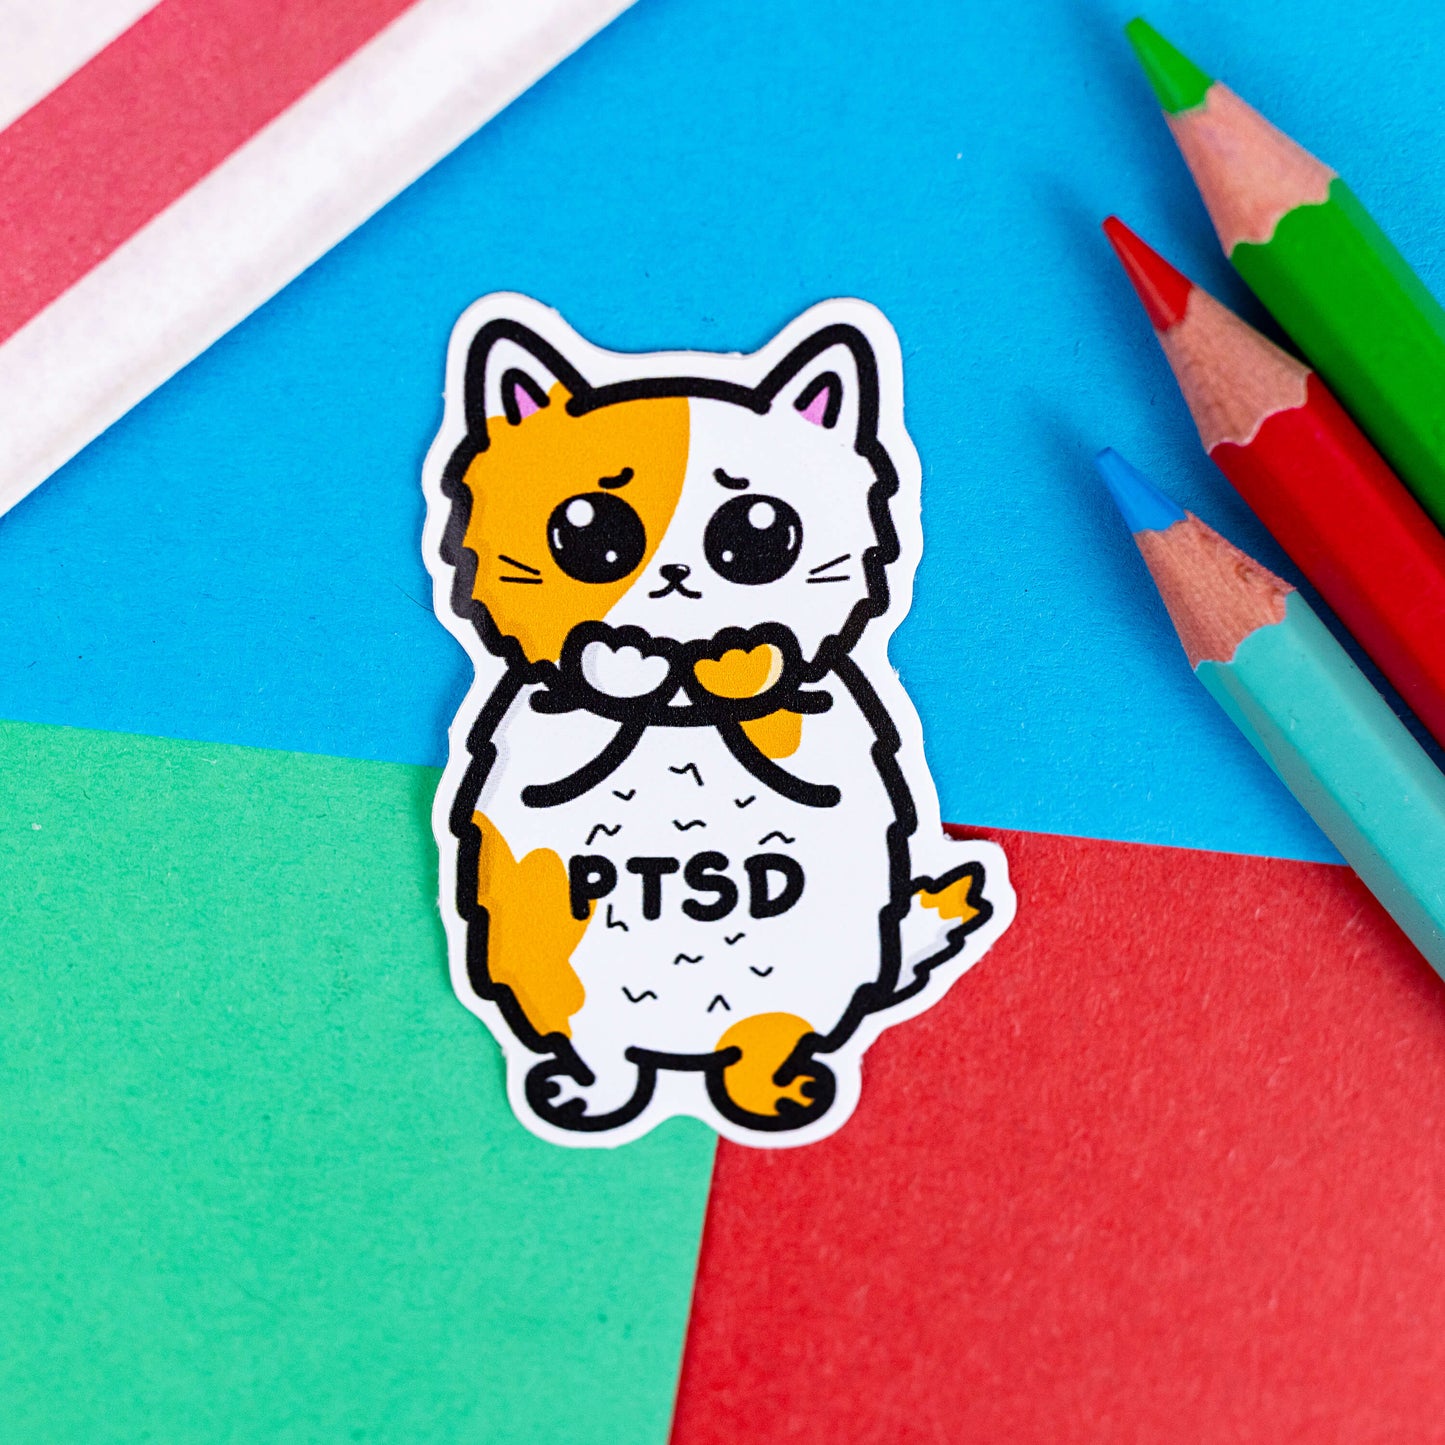 The PTSD Cat Sticker - Post-Traumatic Stress Disorder on a red, blue and green background with colouring pencils and red stripe candy bag. The orange and white scared cat sticker has black text across its middle reading 'PTSD'. The hand drawn design is raising awareness for post traumatic stress disorder.